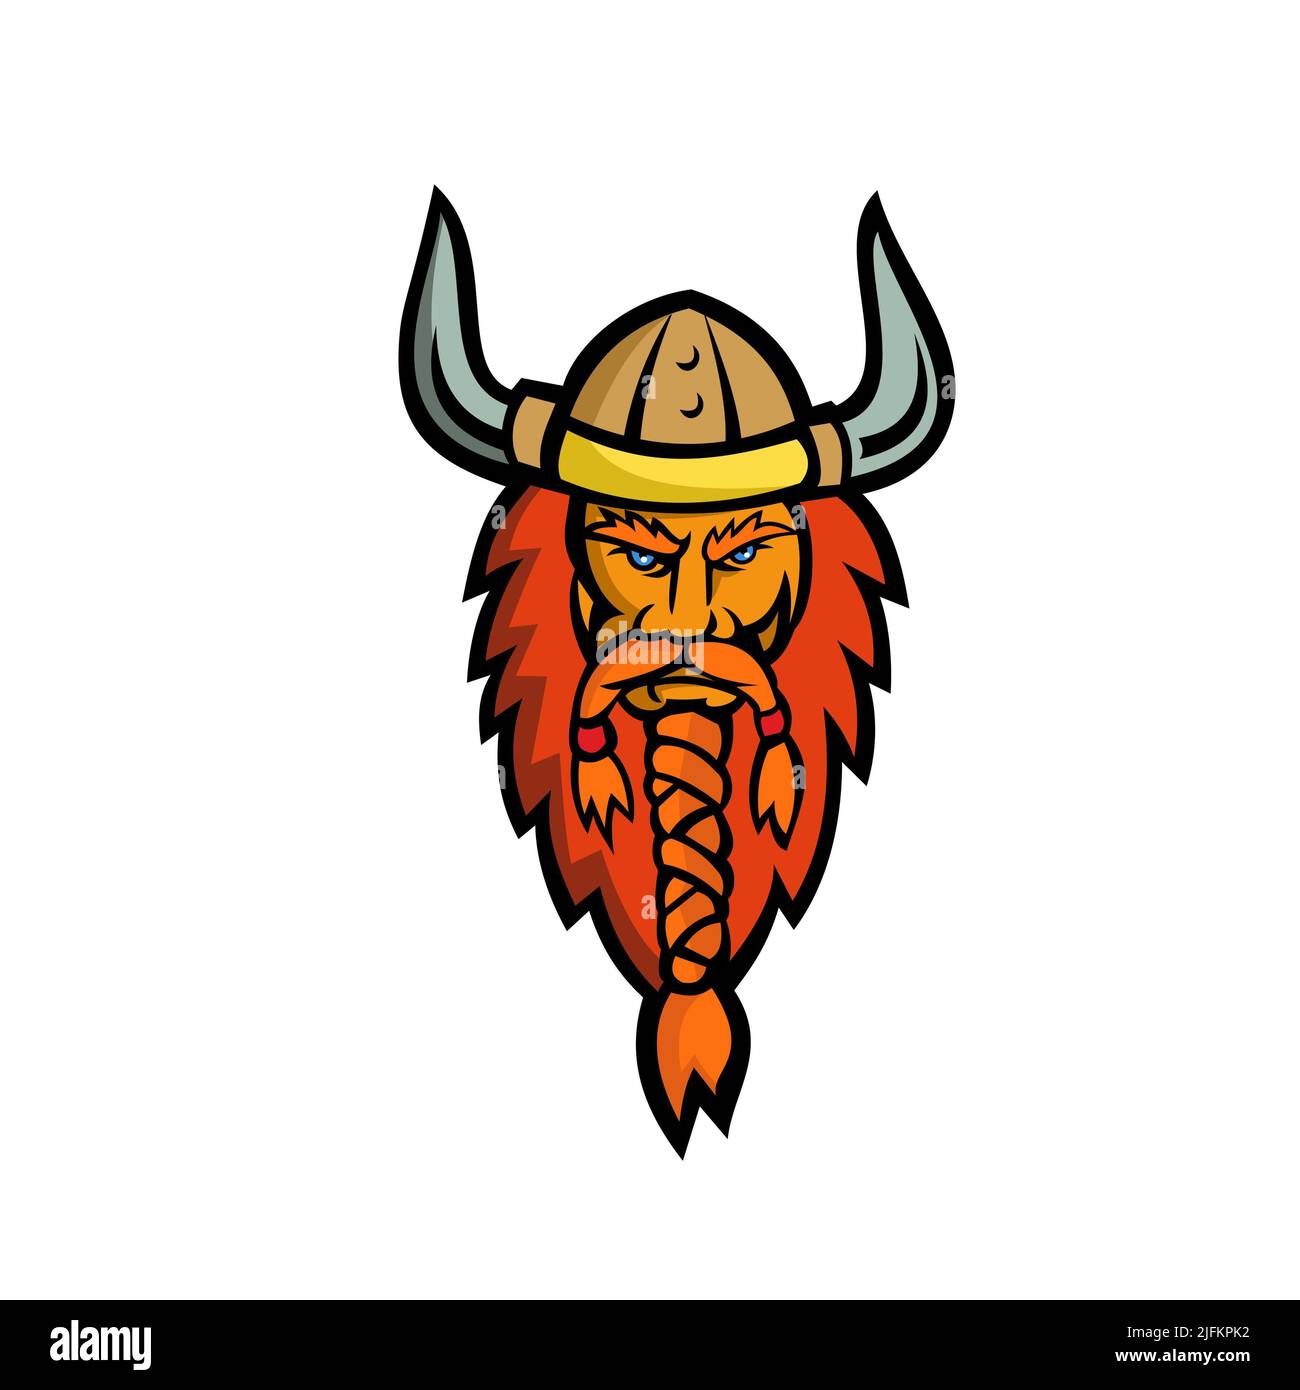 Mascot icon illustration of head of an angry Viking, Norseman or Norse seafarer viewed from front on isolated background in retro style. Stock Photo